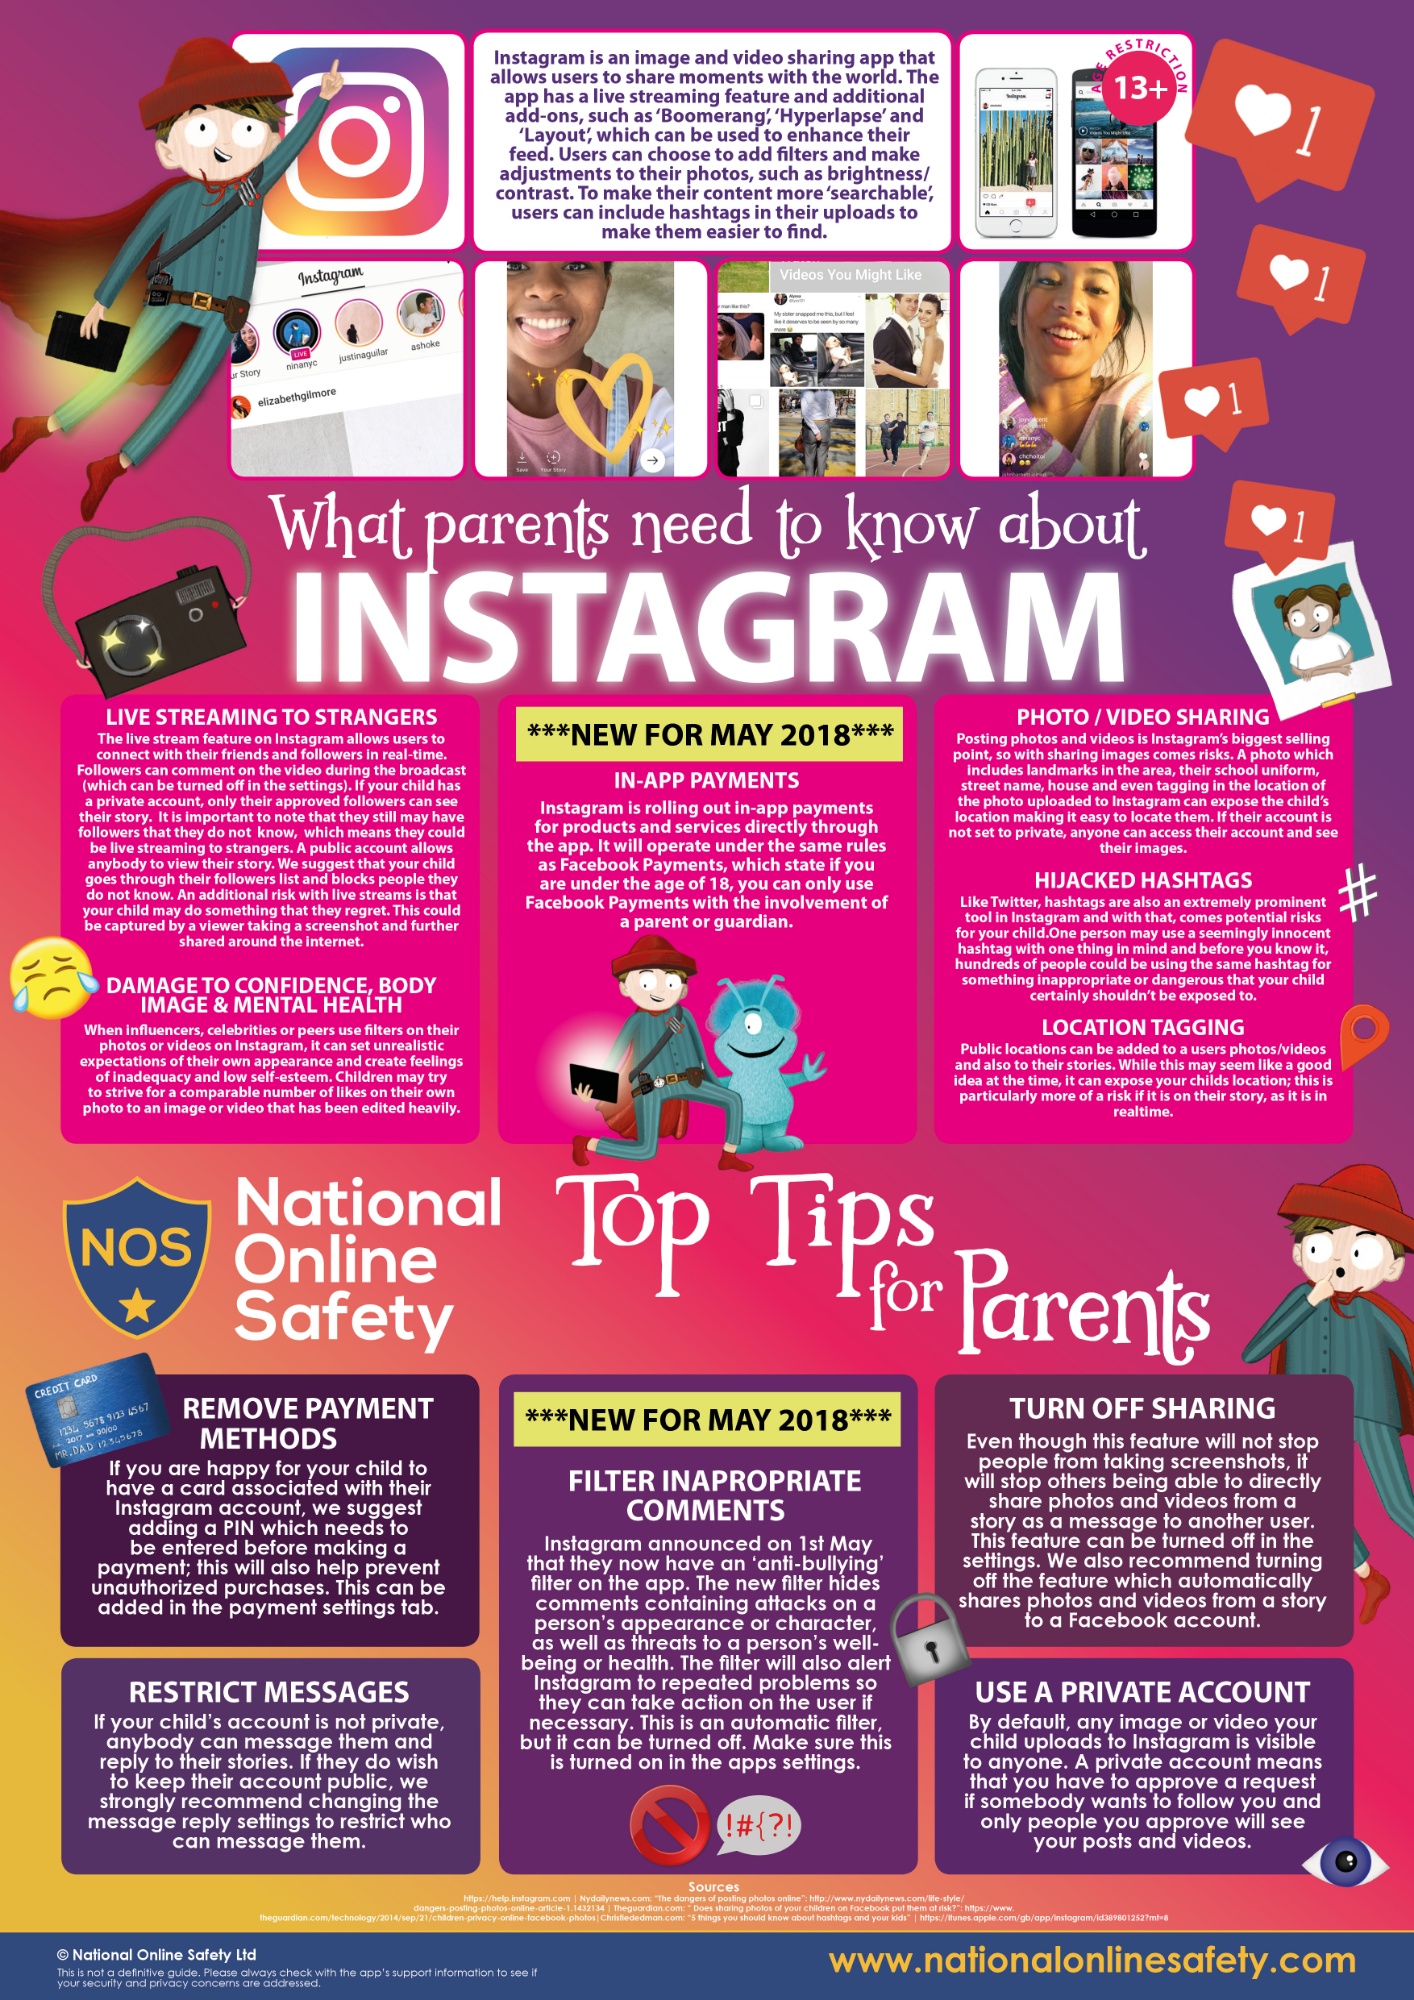 Allowed posting. Internet Safety Guide for parents. Top Tips against bullying. TV and Health problems TV and the parents guidance. Keep me exposed to the language.